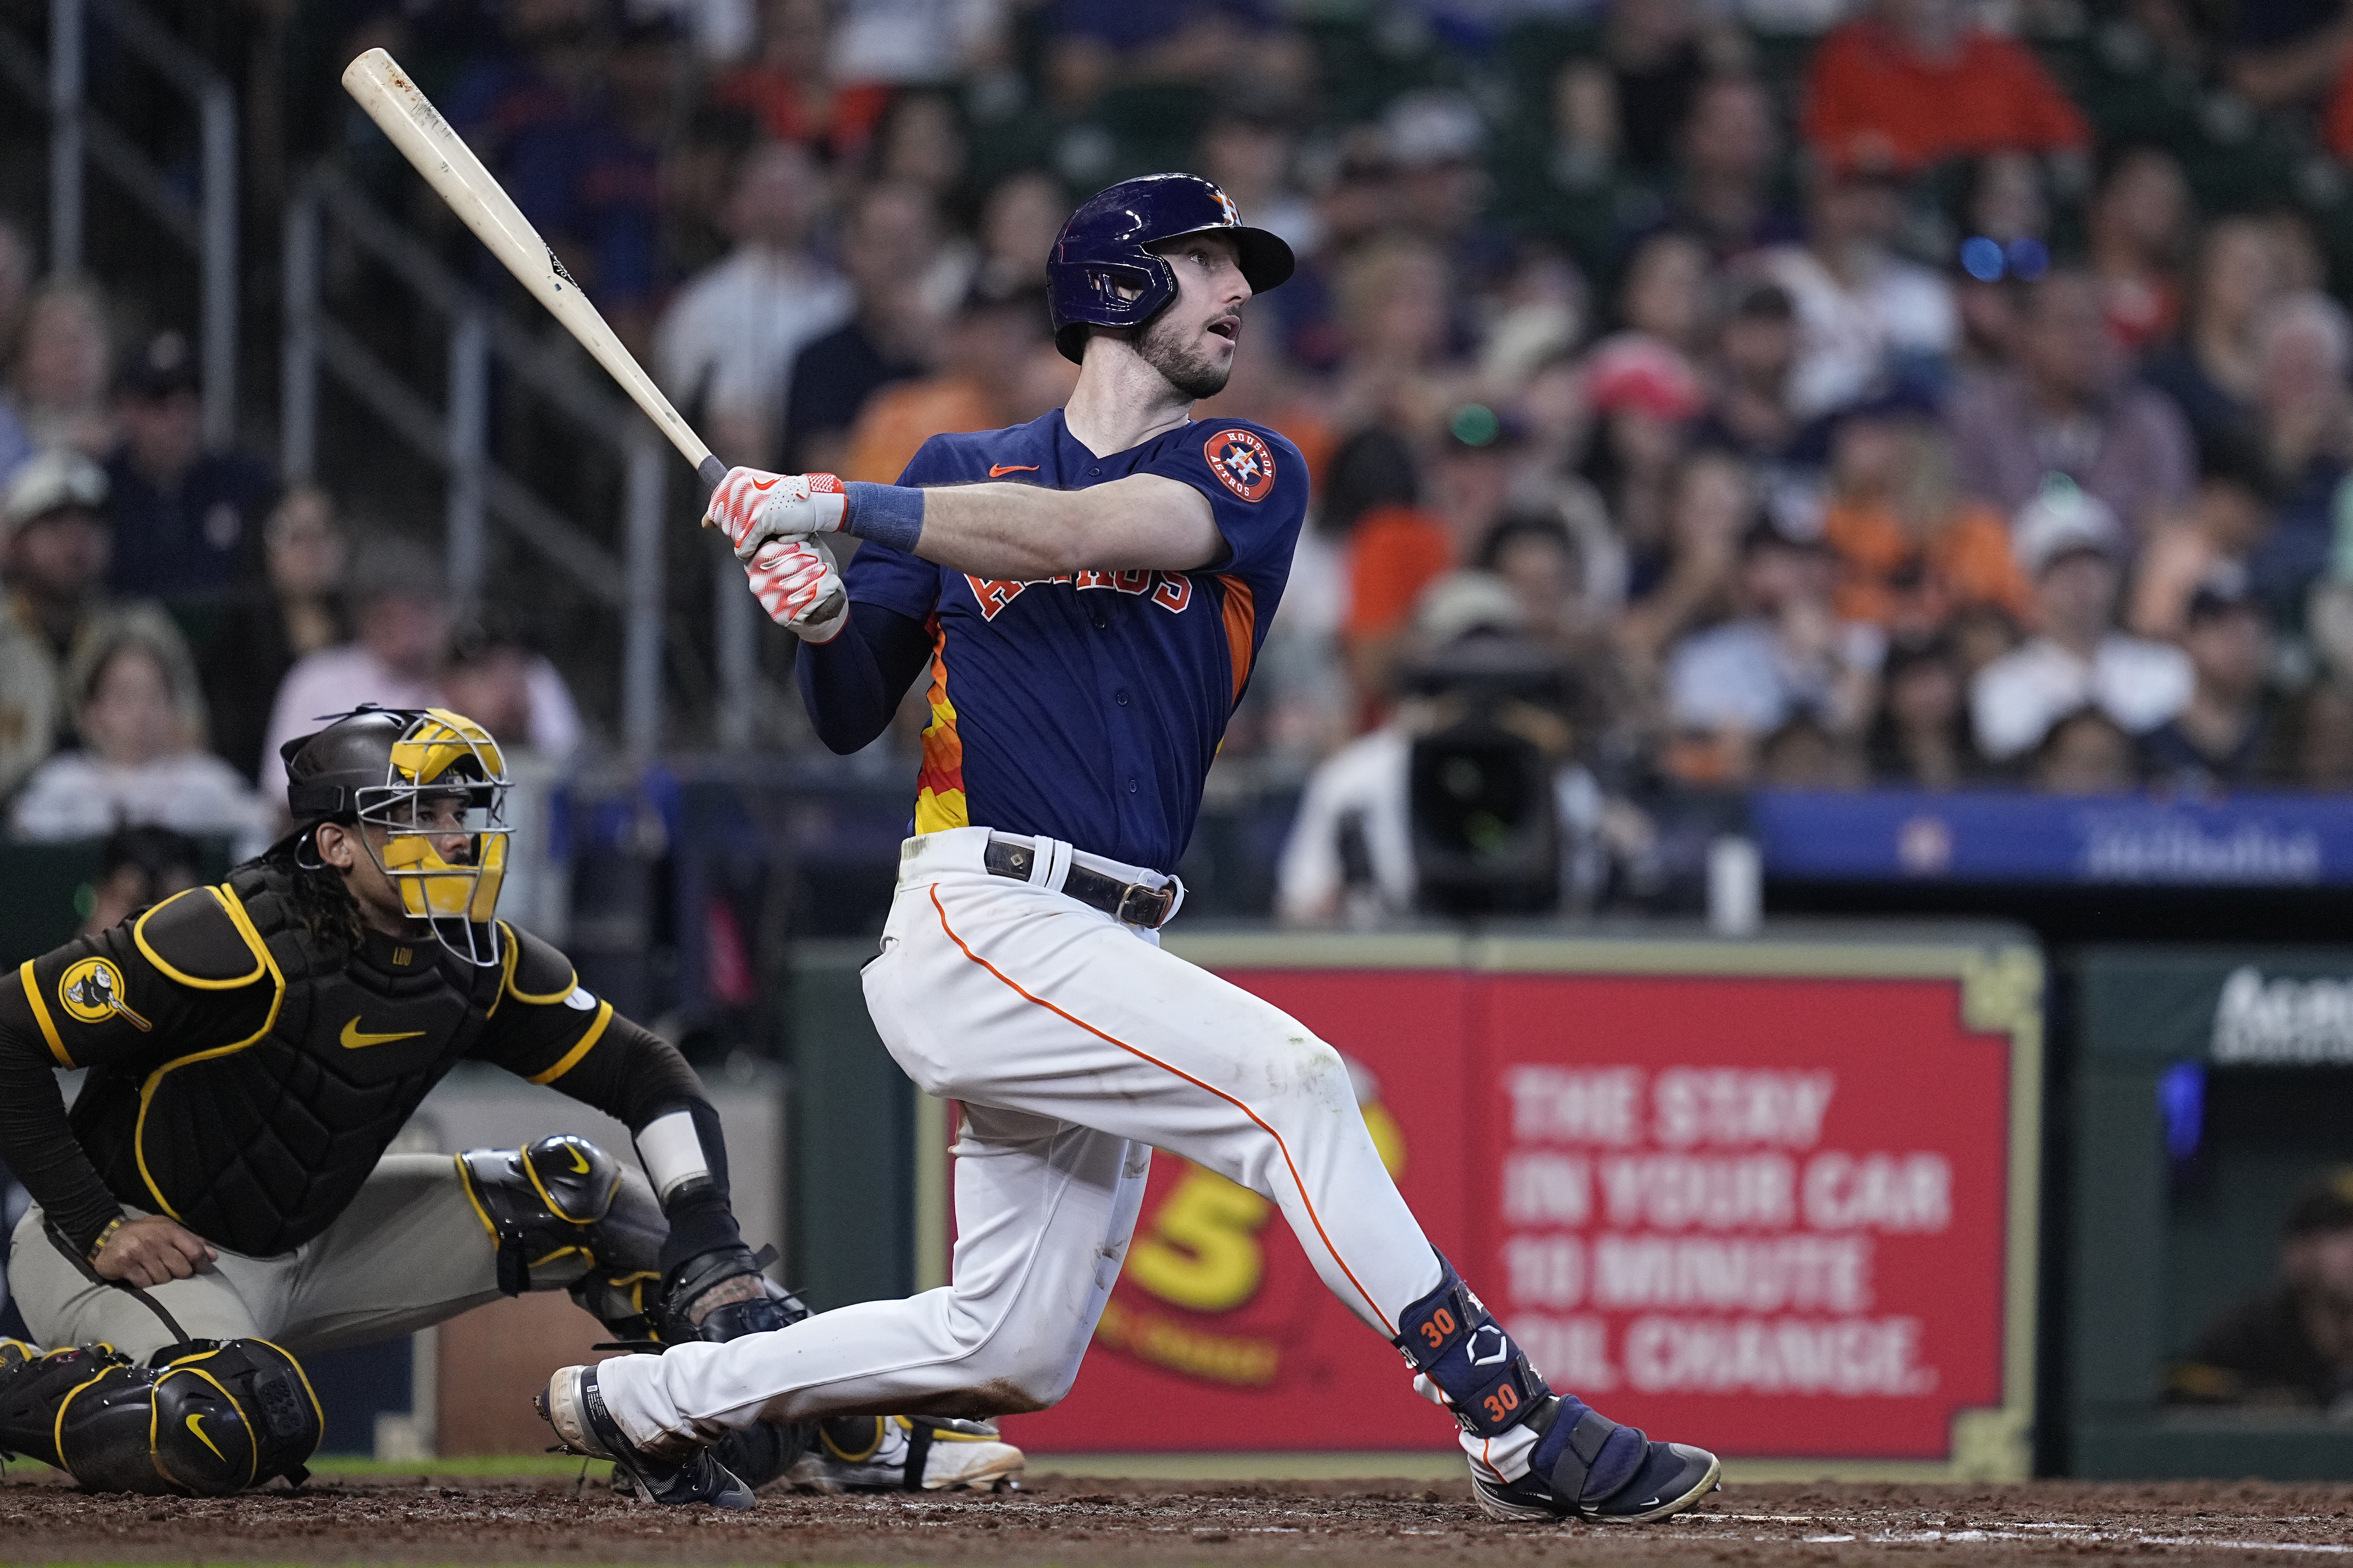 Kyle Tucker hits 2 RBI triples in an inning, Astros rout Padres